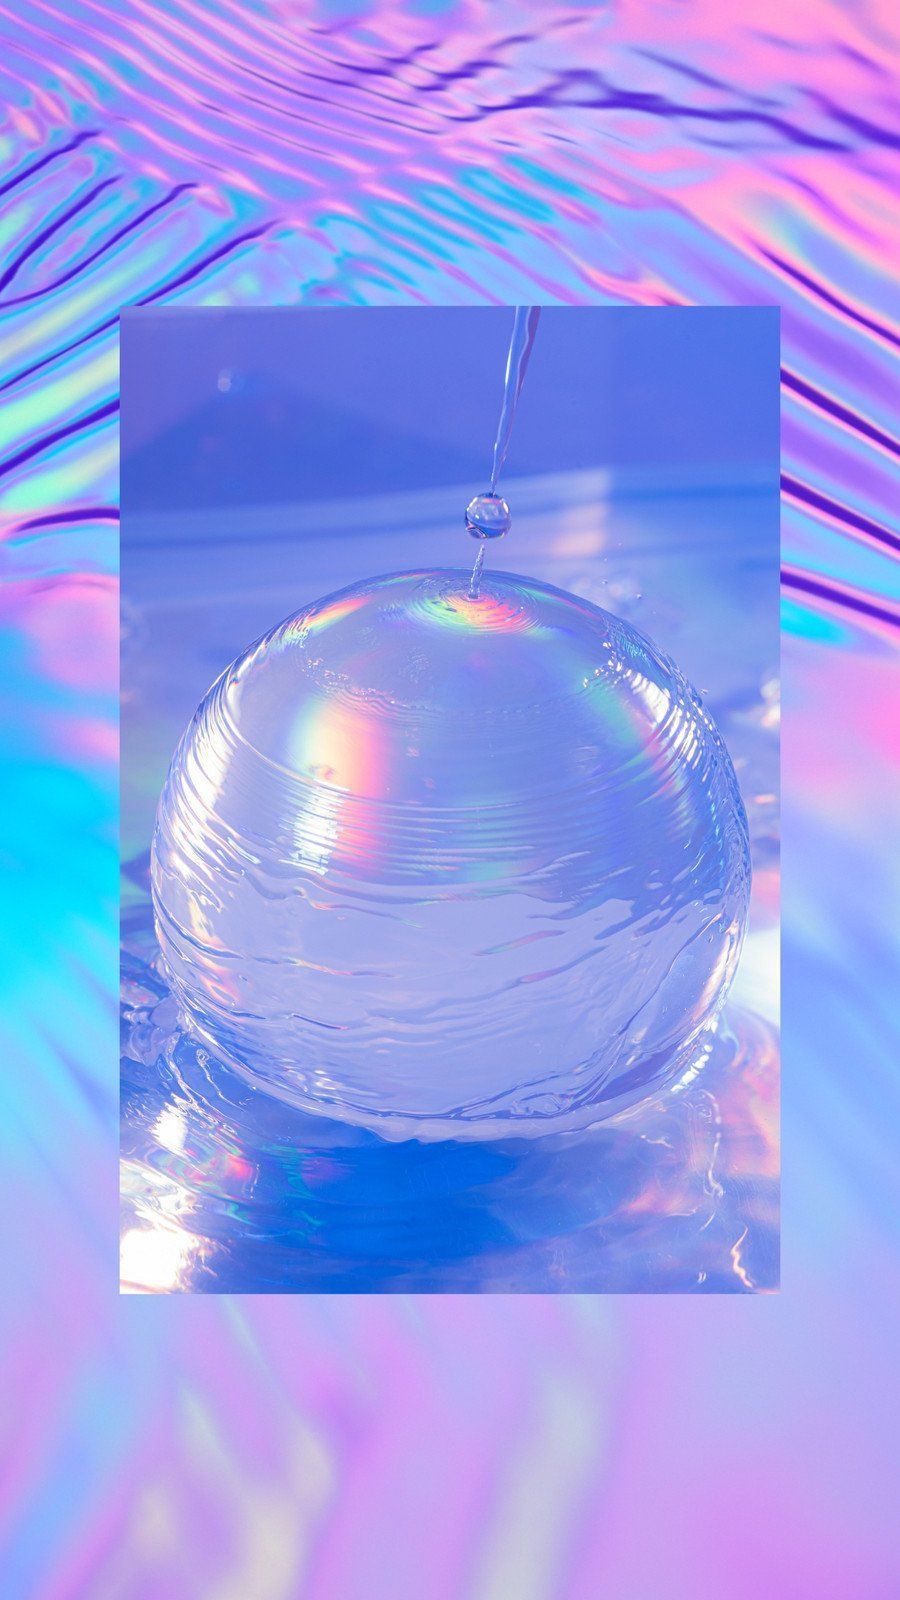 A droplet of water on a sphere, with a colorful background. - Iridescent